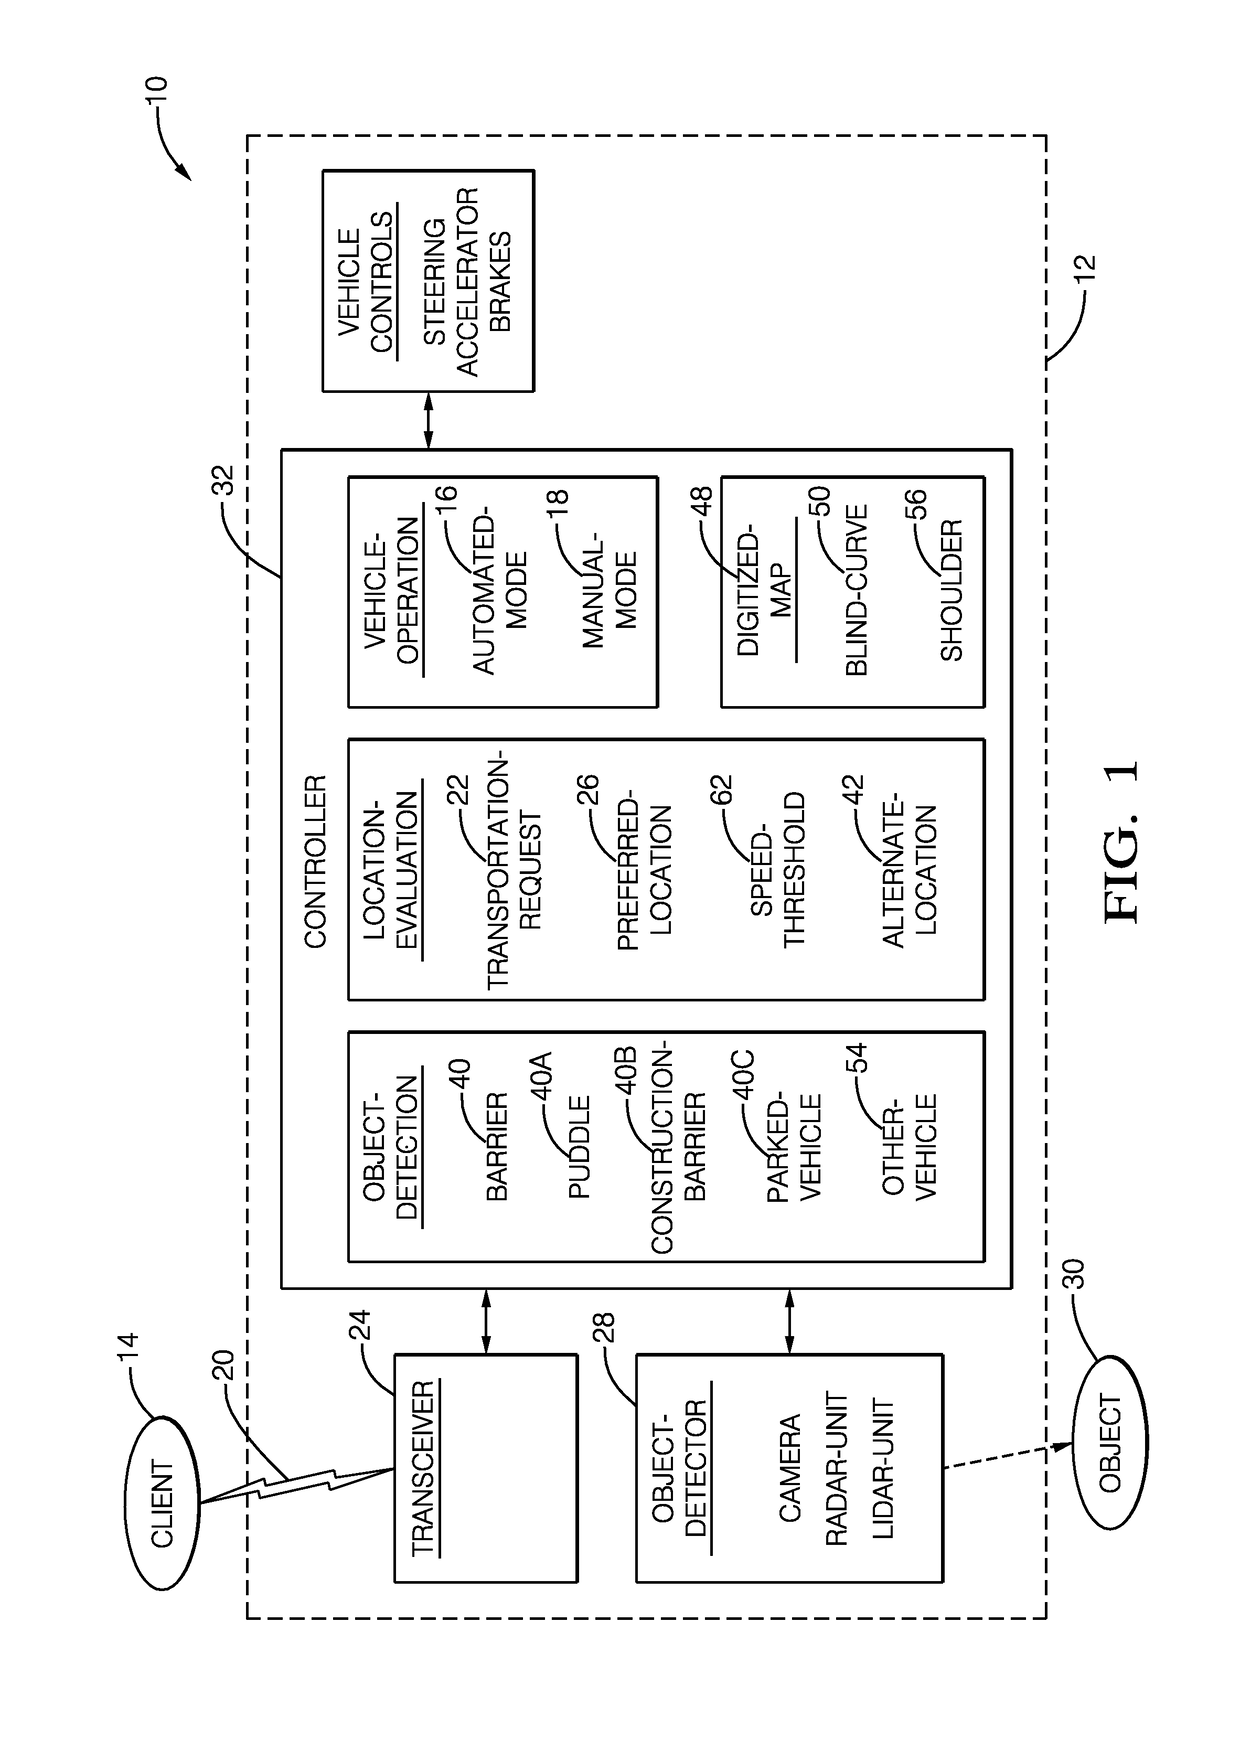 Automated-vehicle pickup-location evaluation system